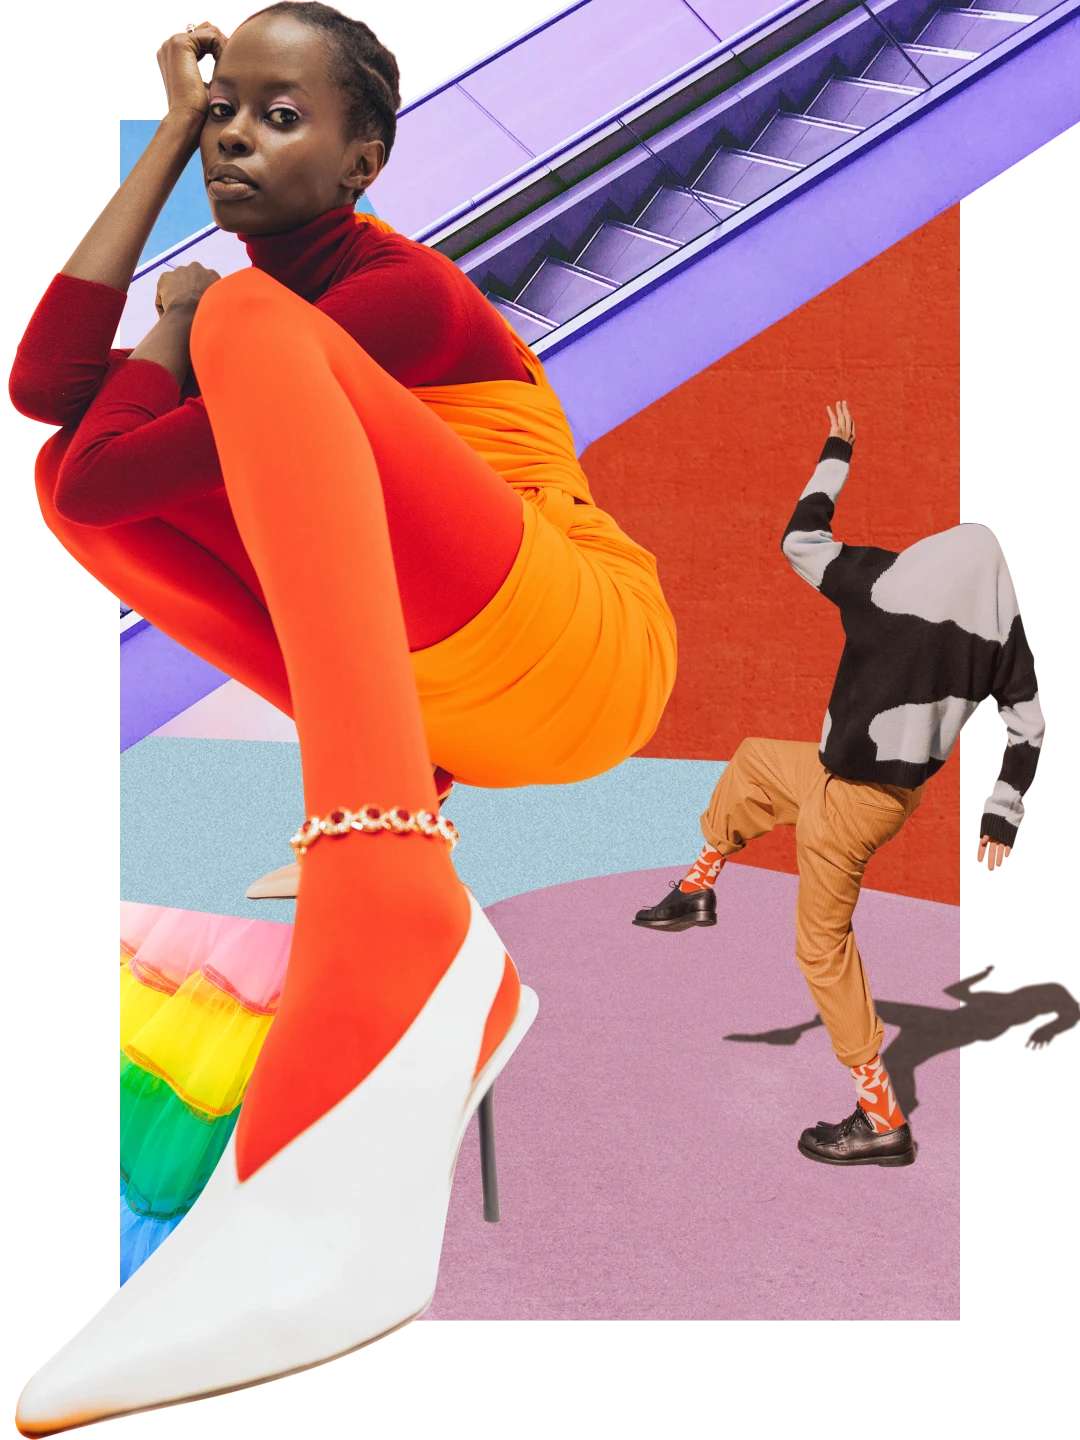 Collage of bright colors and apparel. Black woman to the left wears a bright orange outfit. A person at right wears a printed top pulled over his head, orange pants and orange socks. A purple escalator in the background at top.
